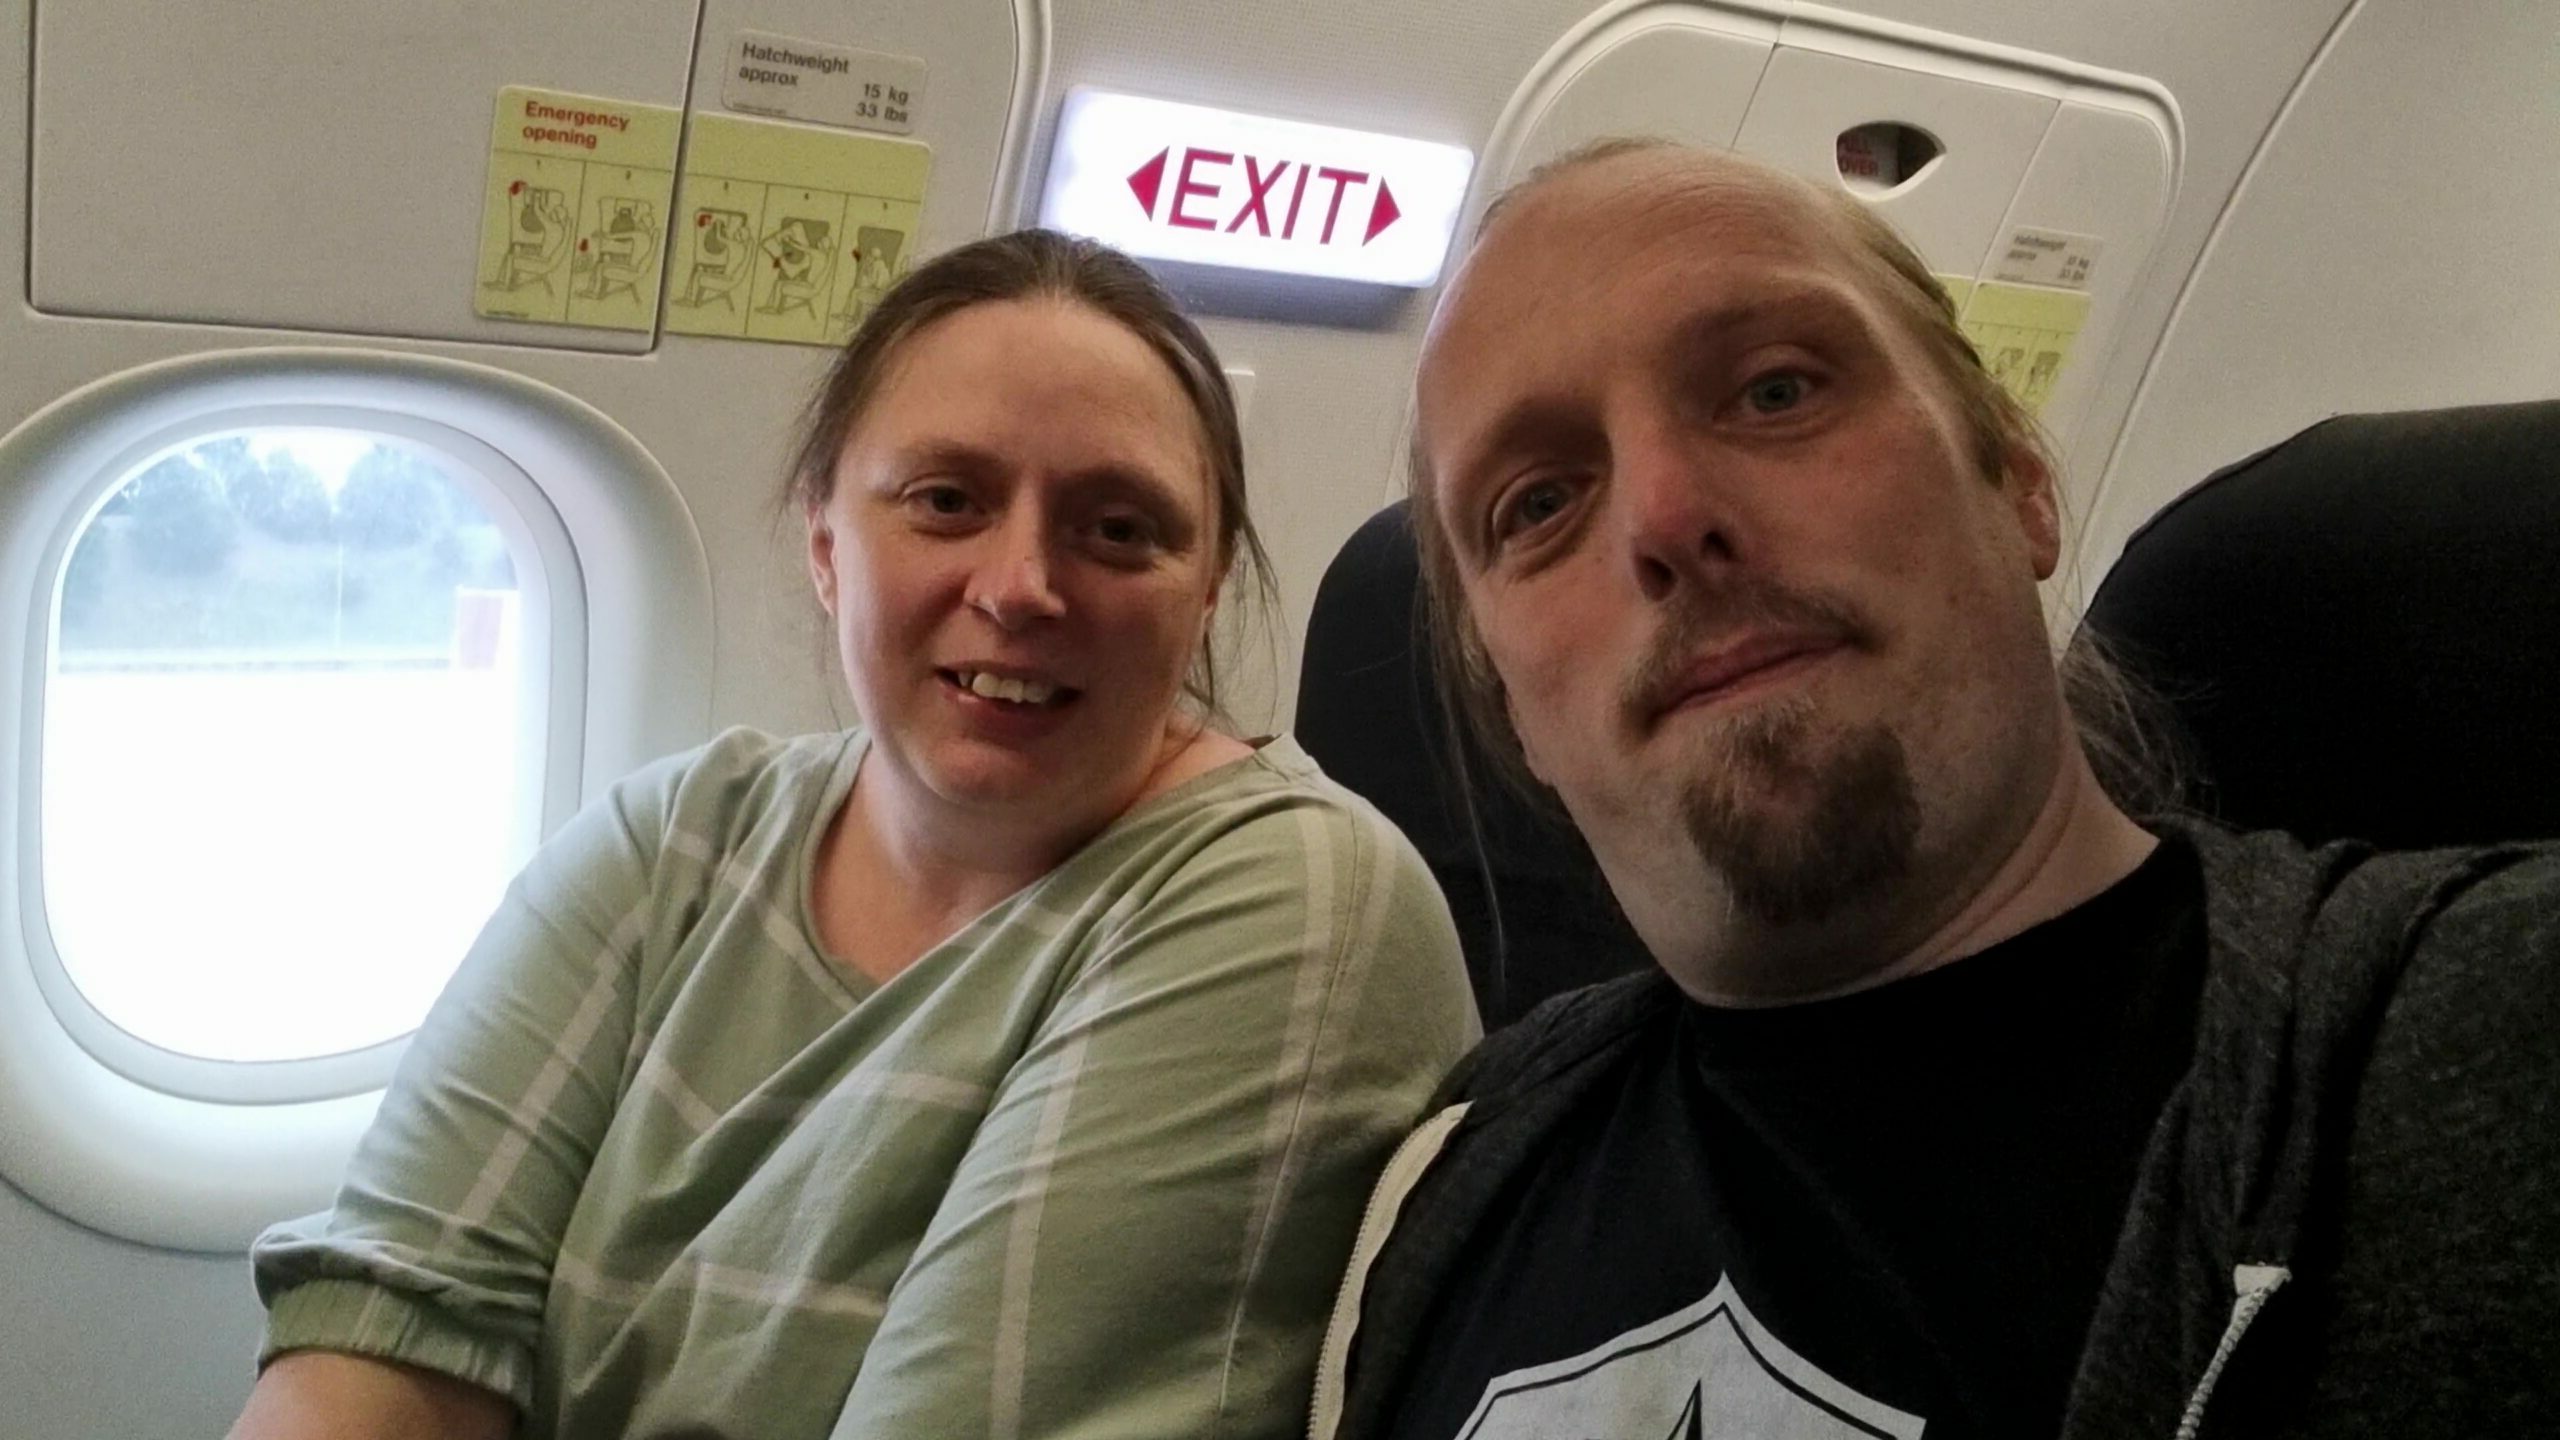 Ruth, wearing a green top with white stripes, sits alongside Dan, wearing a black t-shirt and grey hoodie, by the wingside emergency exits in an aeroplane.